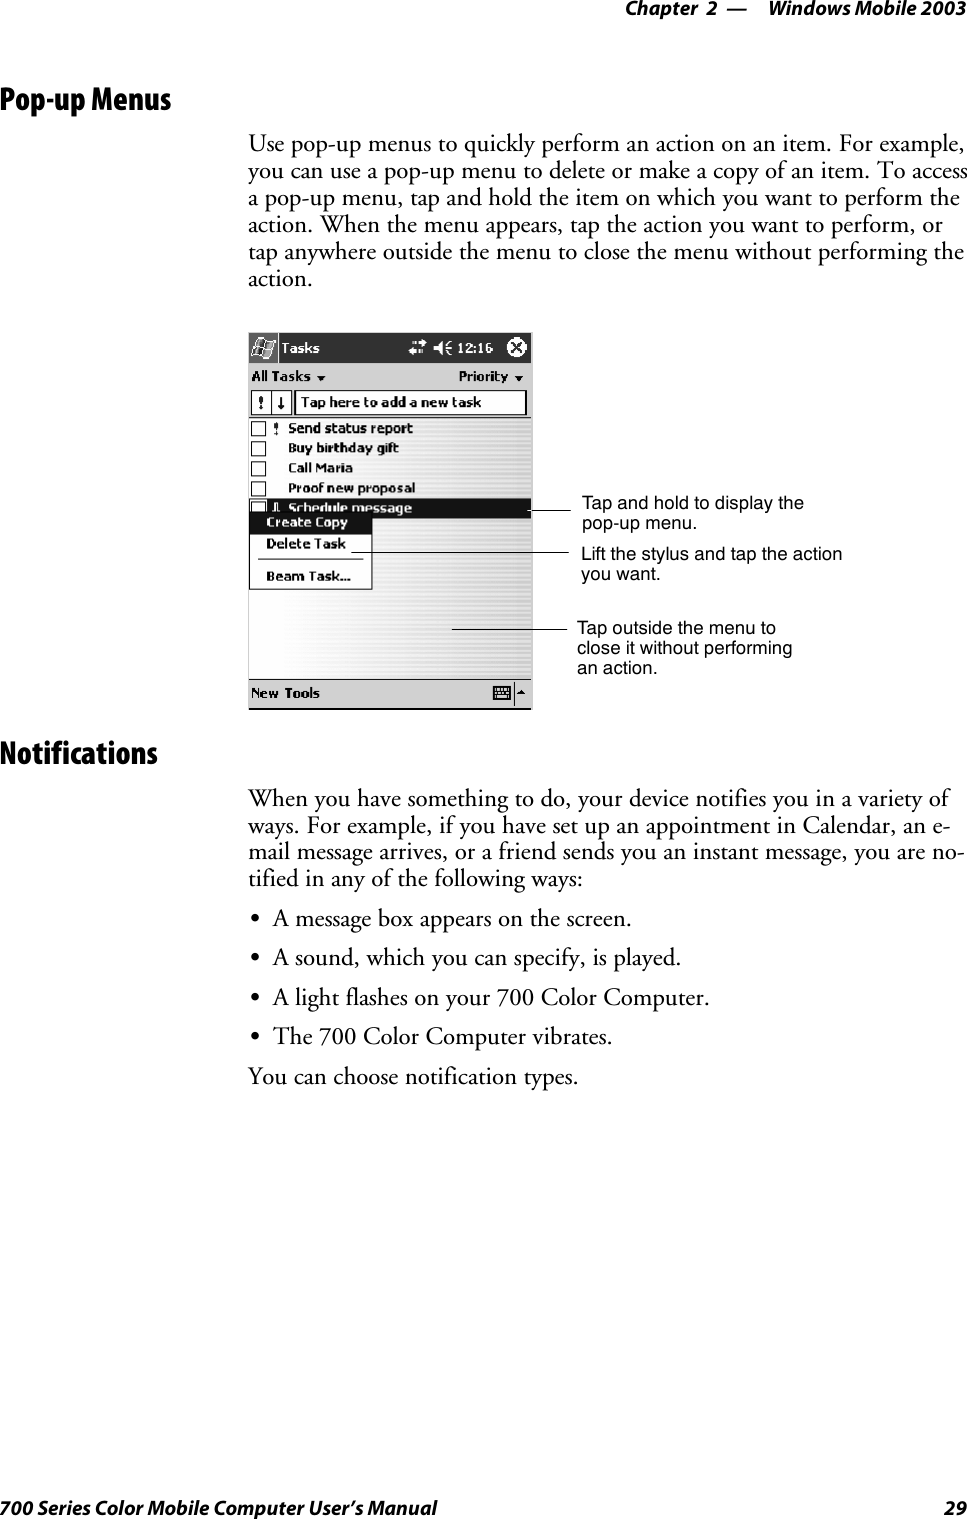 Windows Mobile 2003—Chapter 229700 Series Color Mobile Computer User’s ManualPop-up MenusUse pop-up menus to quickly perform an action on an item. For example,you can use a pop-up menu to delete or make a copy of an item. To accessa pop-up menu, tap and hold the item on which you want to perform theaction. When the menu appears, tap the action you want to perform, ortap anywhere outside the menu to close the menu without performing theaction.Tap and hold to display thepop-up menu.Lift the stylus and tap the actionyou want.Tap outside the menu toclose it without performingan action.NotificationsWhen you have something to do, your device notifies you in a variety ofways. For example, if you have set up an appointment in Calendar, an e-mail message arrives, or a friend sends you an instant message, you are no-tified in any of the following ways:SA message box appears on the screen.SA sound, which you can specify, is played.SA light flashes on your 700 Color Computer.SThe 700 Color Computer vibrates.You can choose notification types.